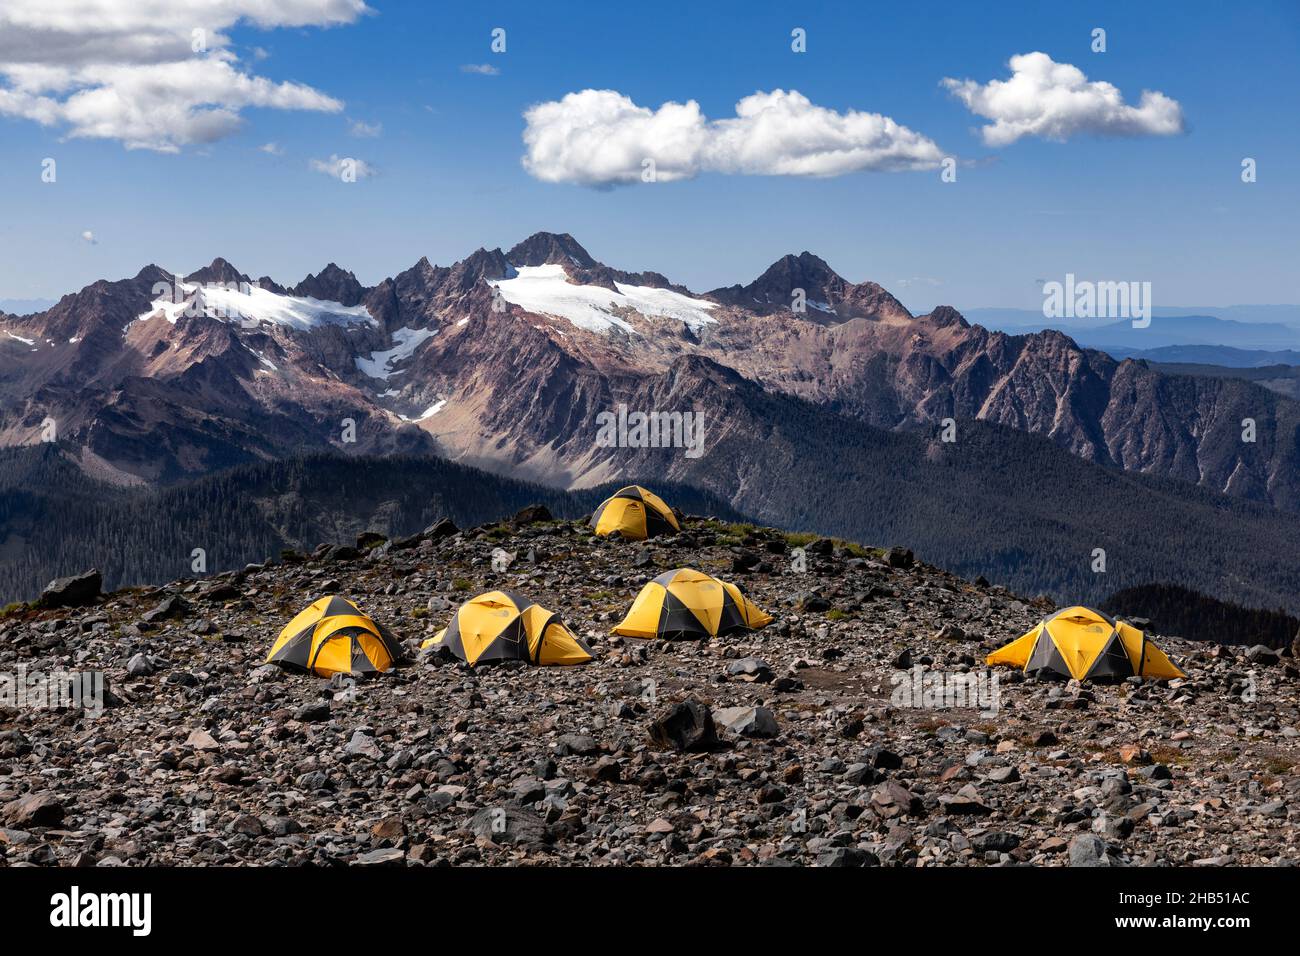 WA20538-00....WASHINGTON - Campsite at High Camp along the Railroad Grade Trail in the Mount Baker National Recreation Area, Stock Photo